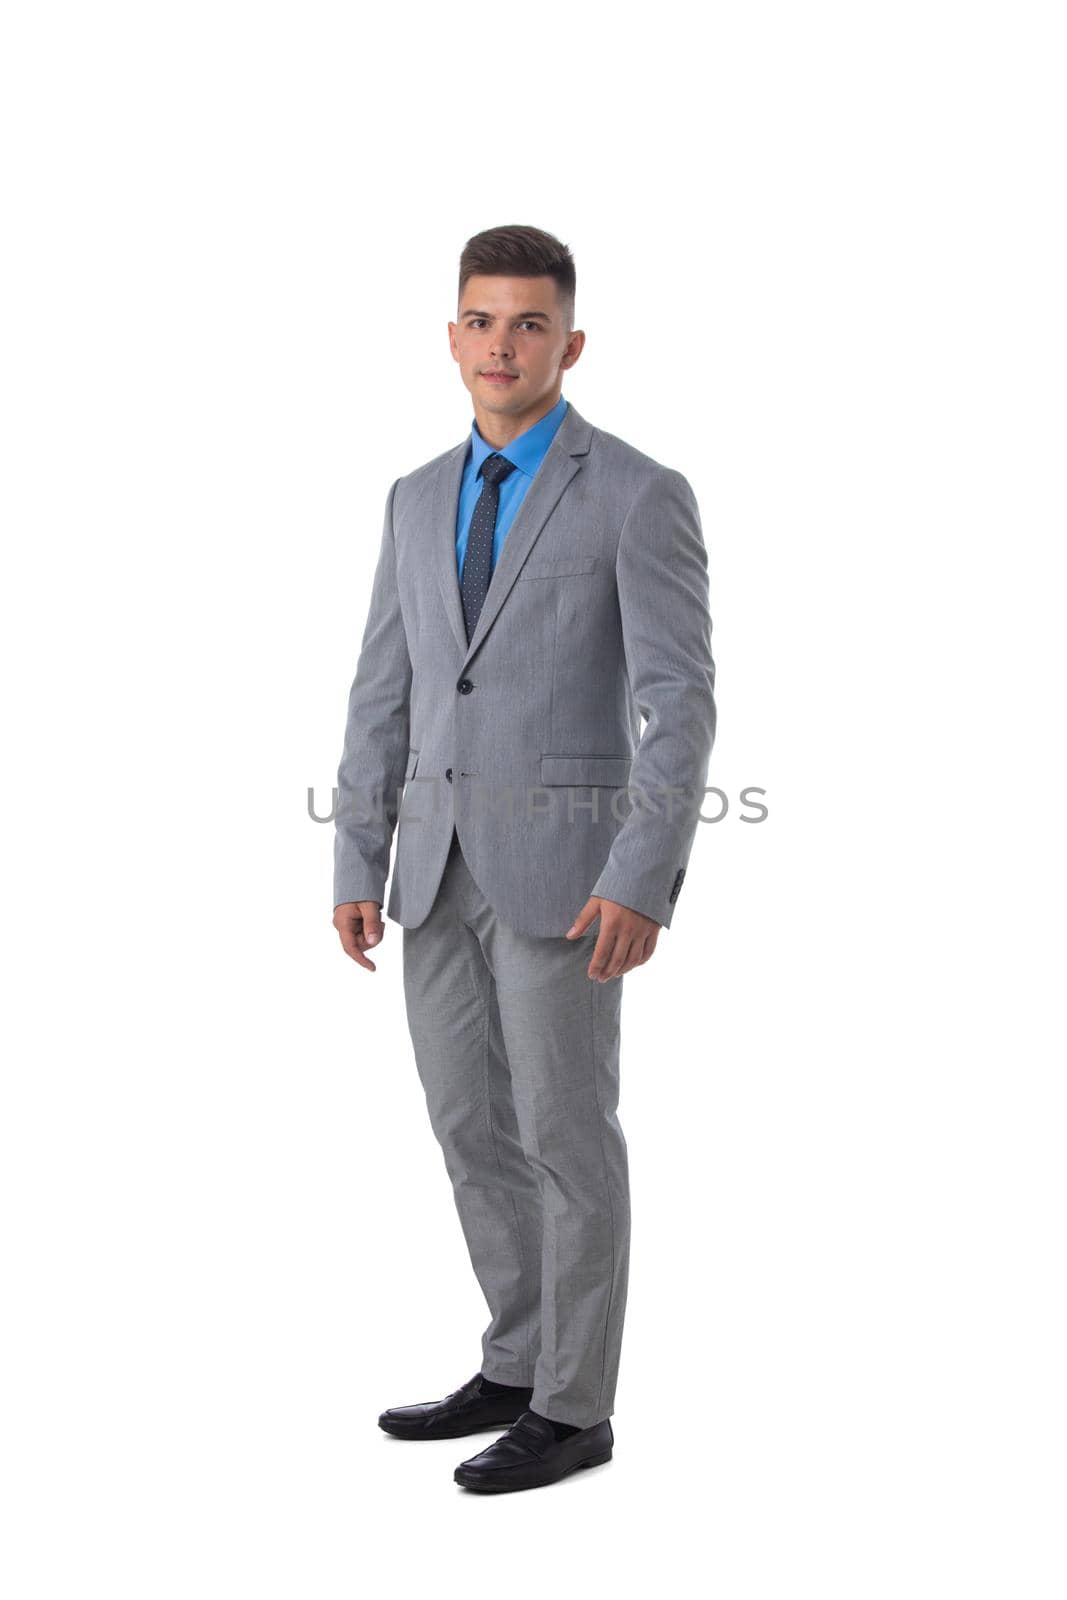 Portrait of business man in suit by ALotOfPeople